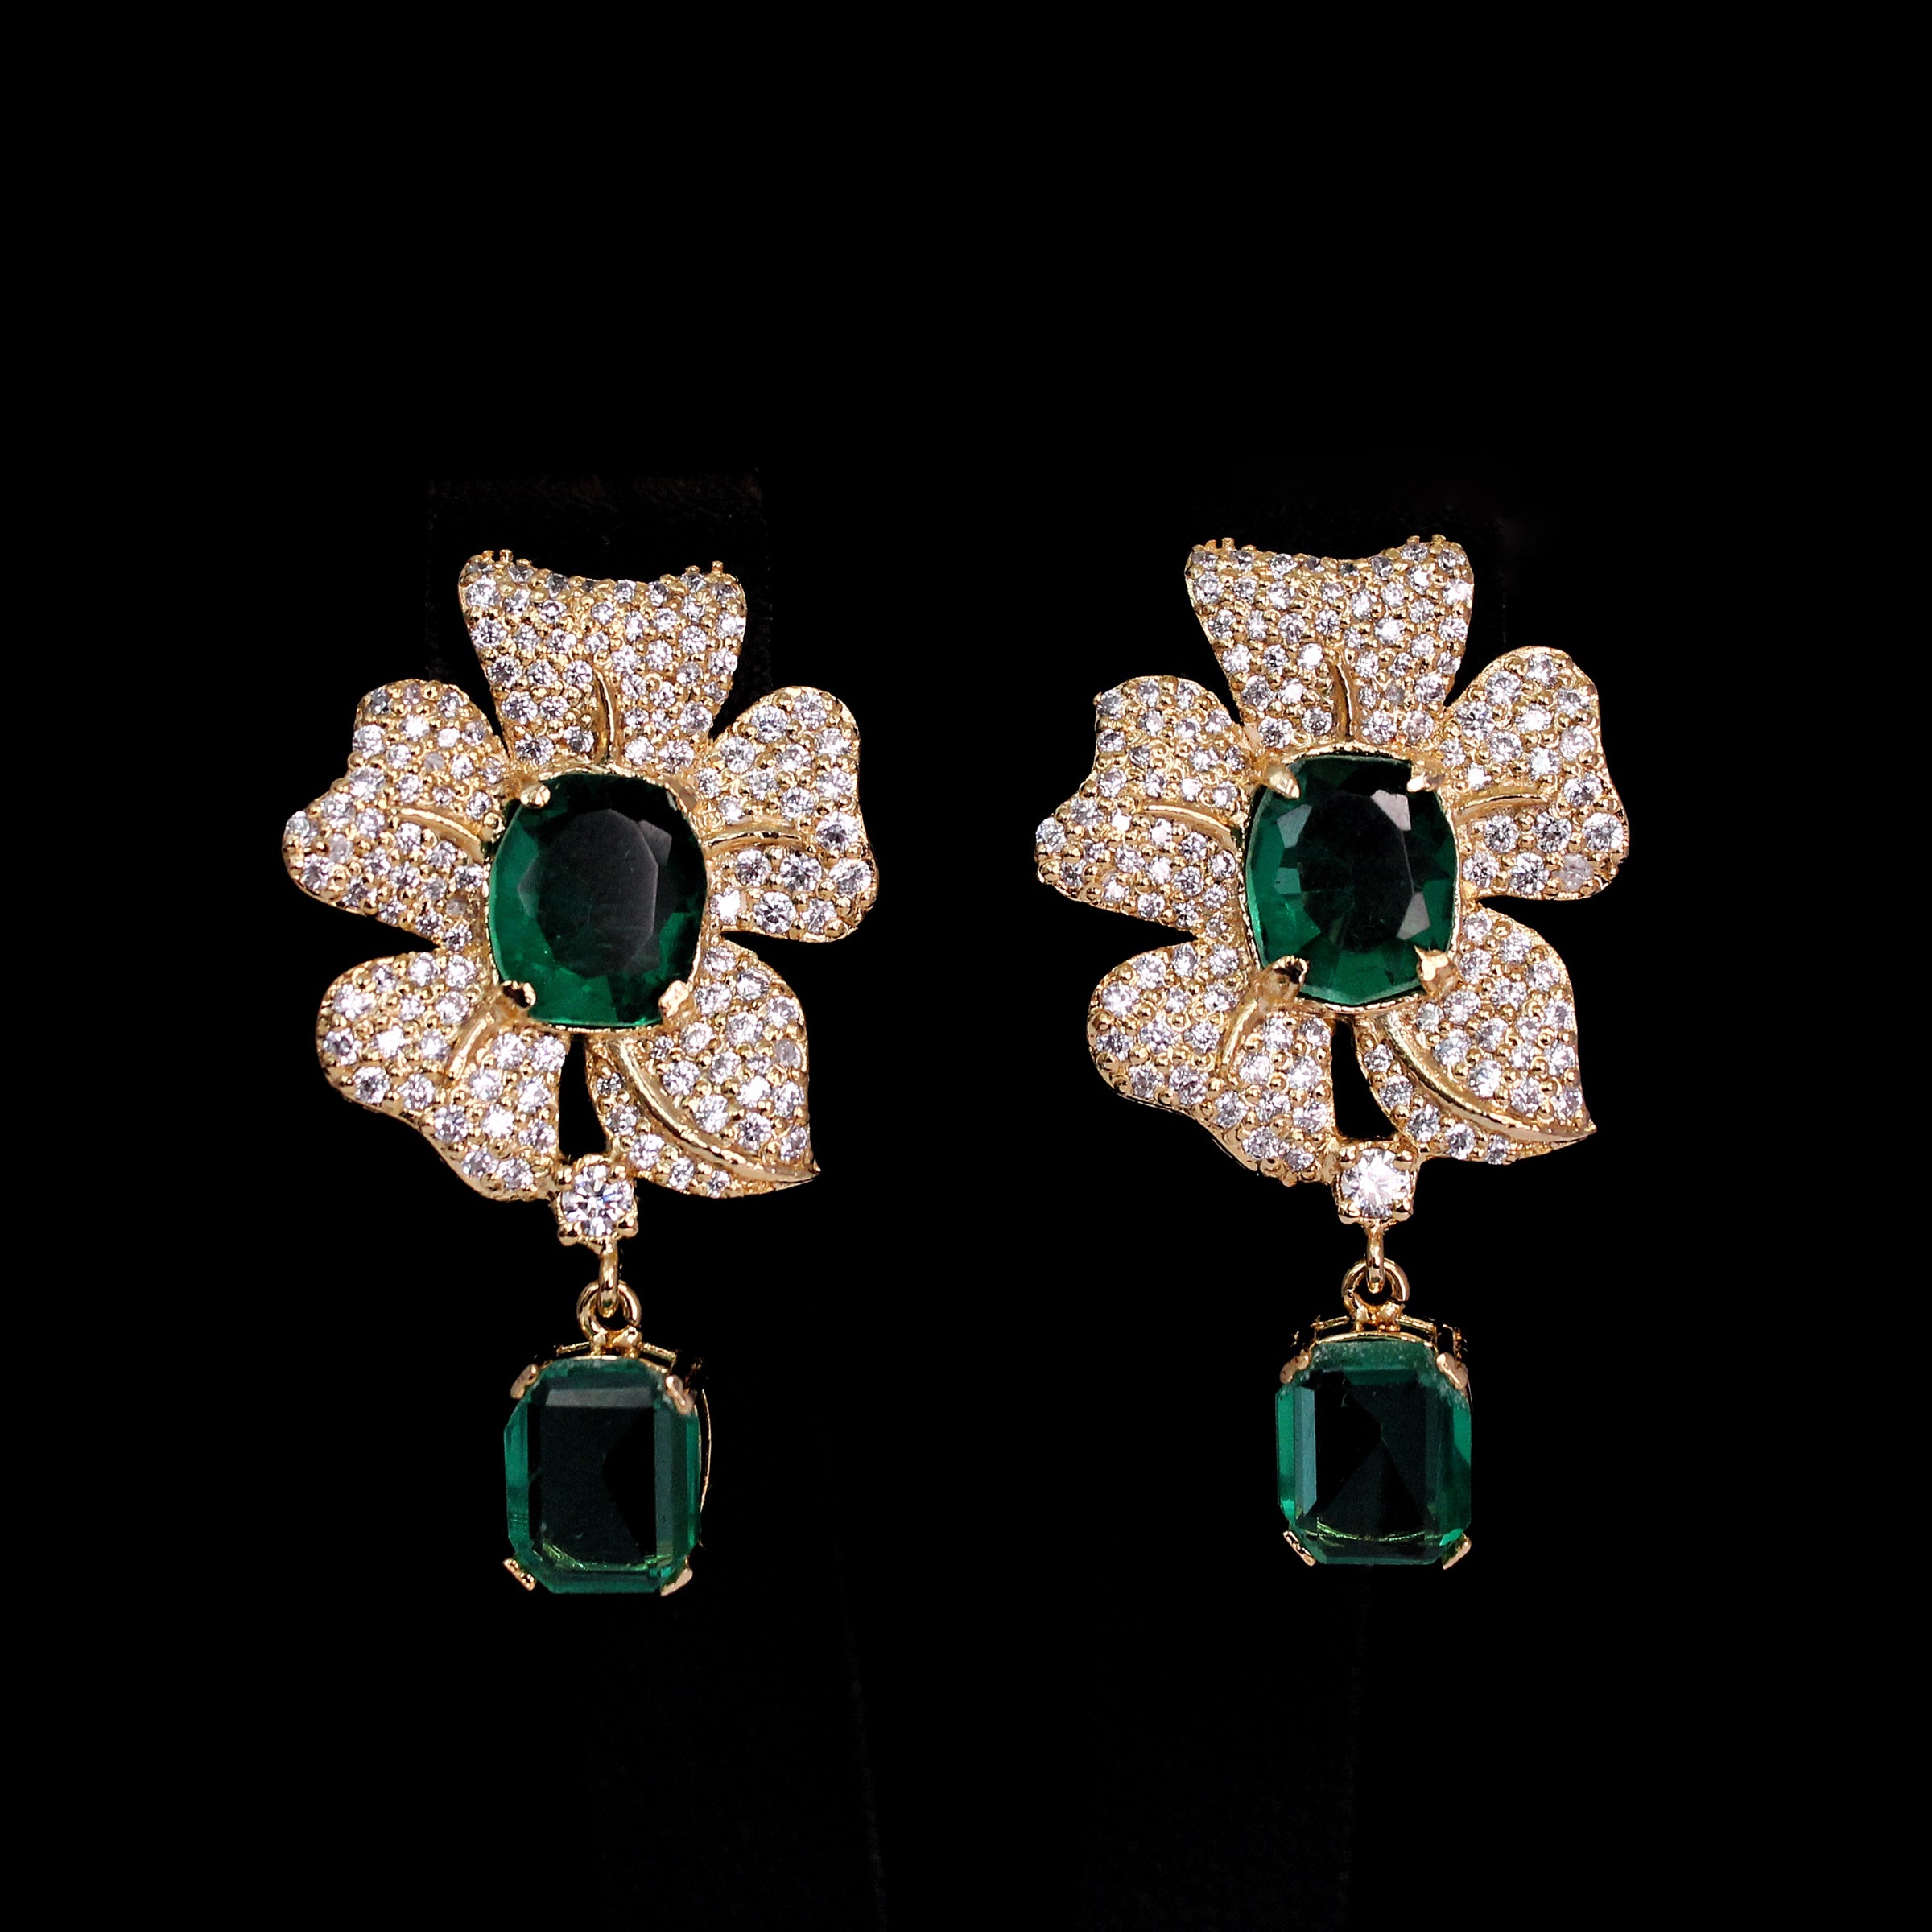 https://www.indiatrndshop.shop/wp-content/uploads/1699/74/latest-products-45-00-usd-for-flower-shaped-earrings-boutiques_0.jpg